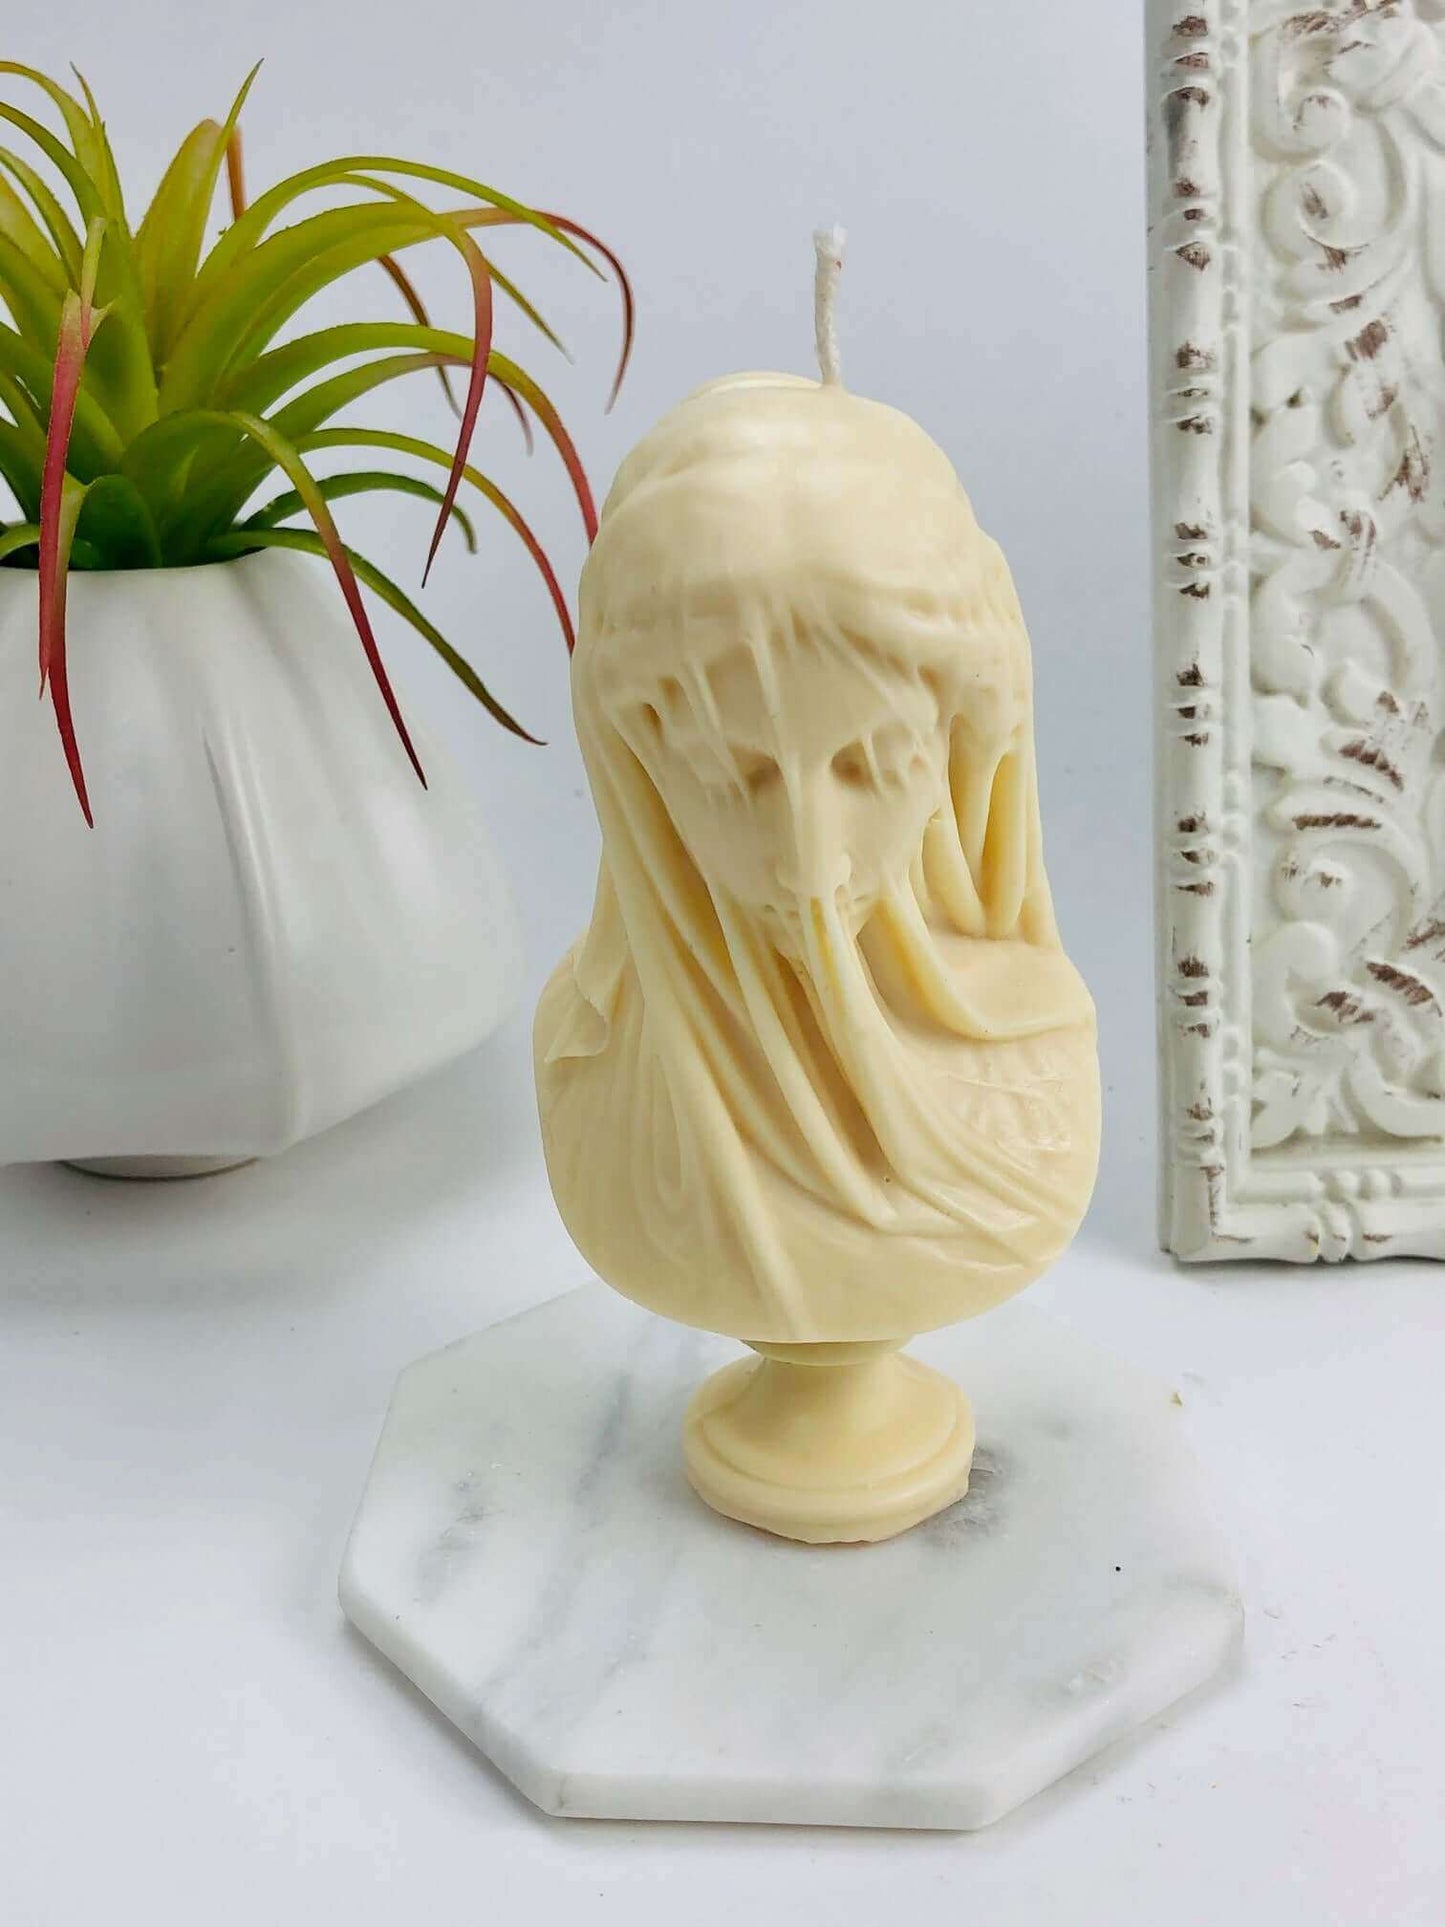 Veiled lady bust aesthetic candle